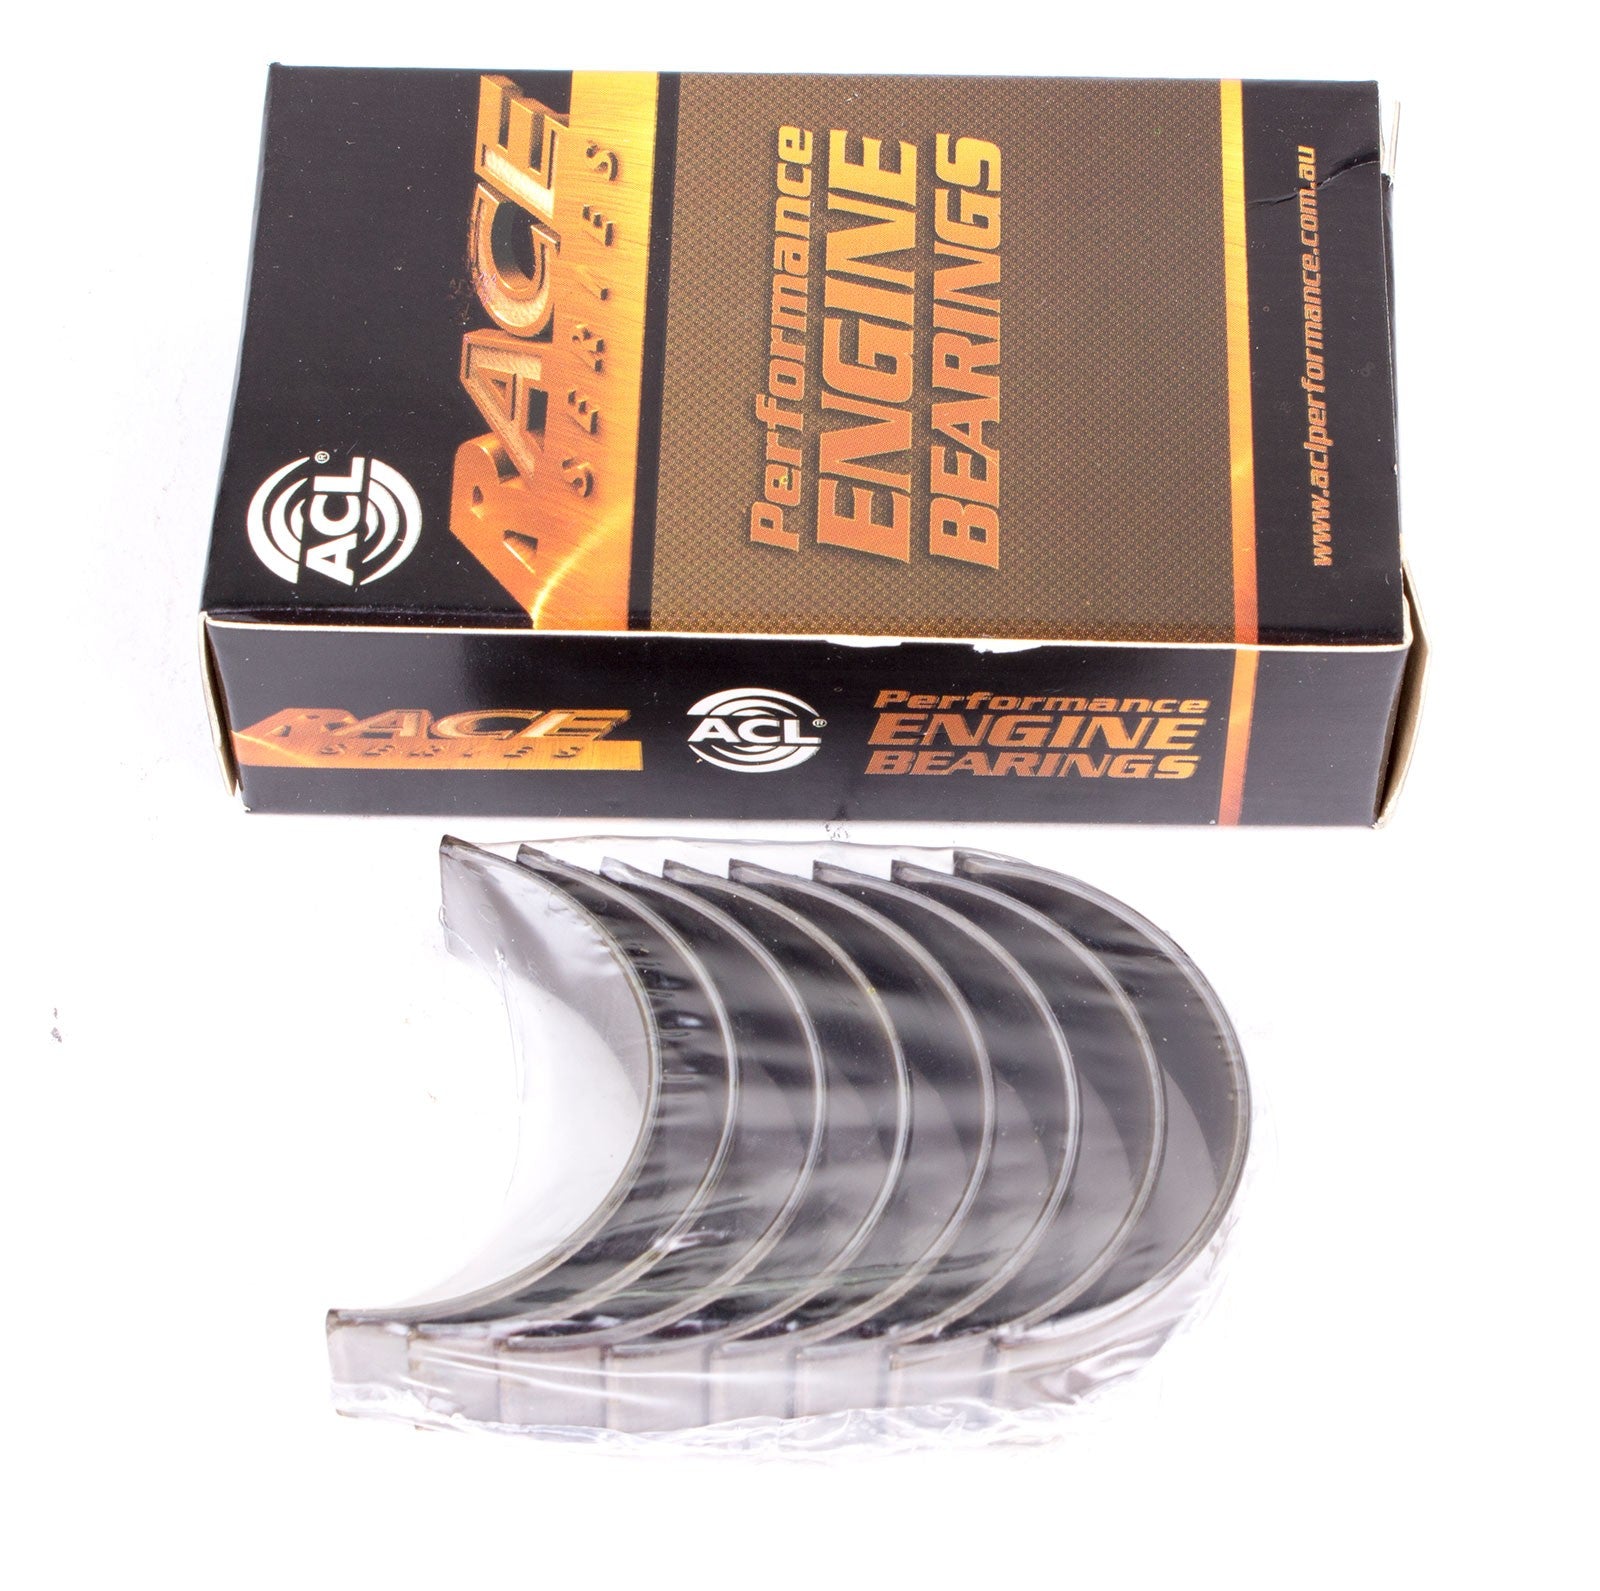 ACL 5M2797H-.50 Main bearing set (ACL Race Series) Photo-0 